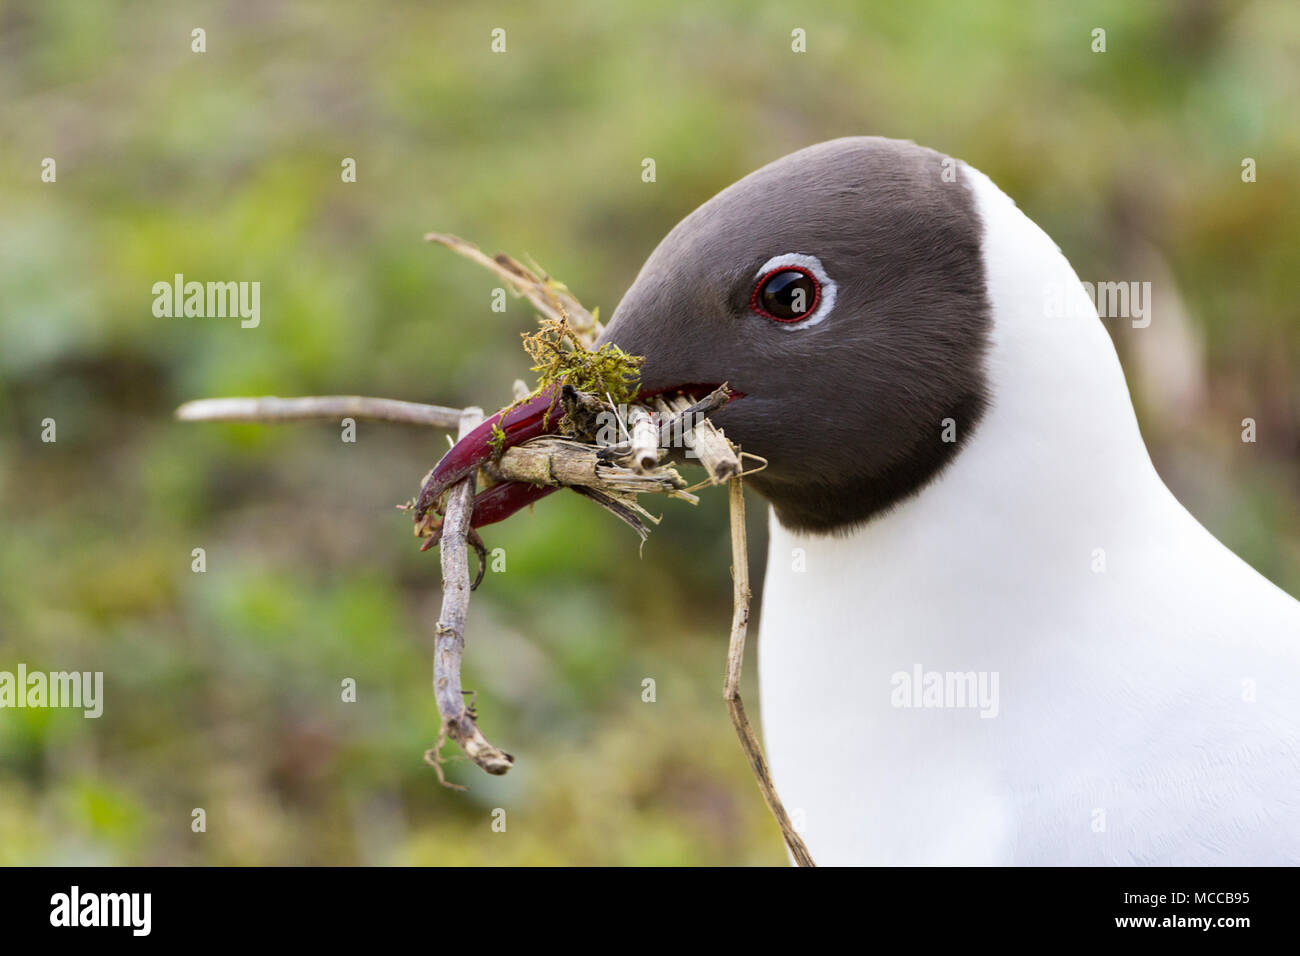 Black headed gull (Larus ridibundus) collecting nesting material with a bill full of twigs and vegetation. This is a close up detailed head image. Stock Photo